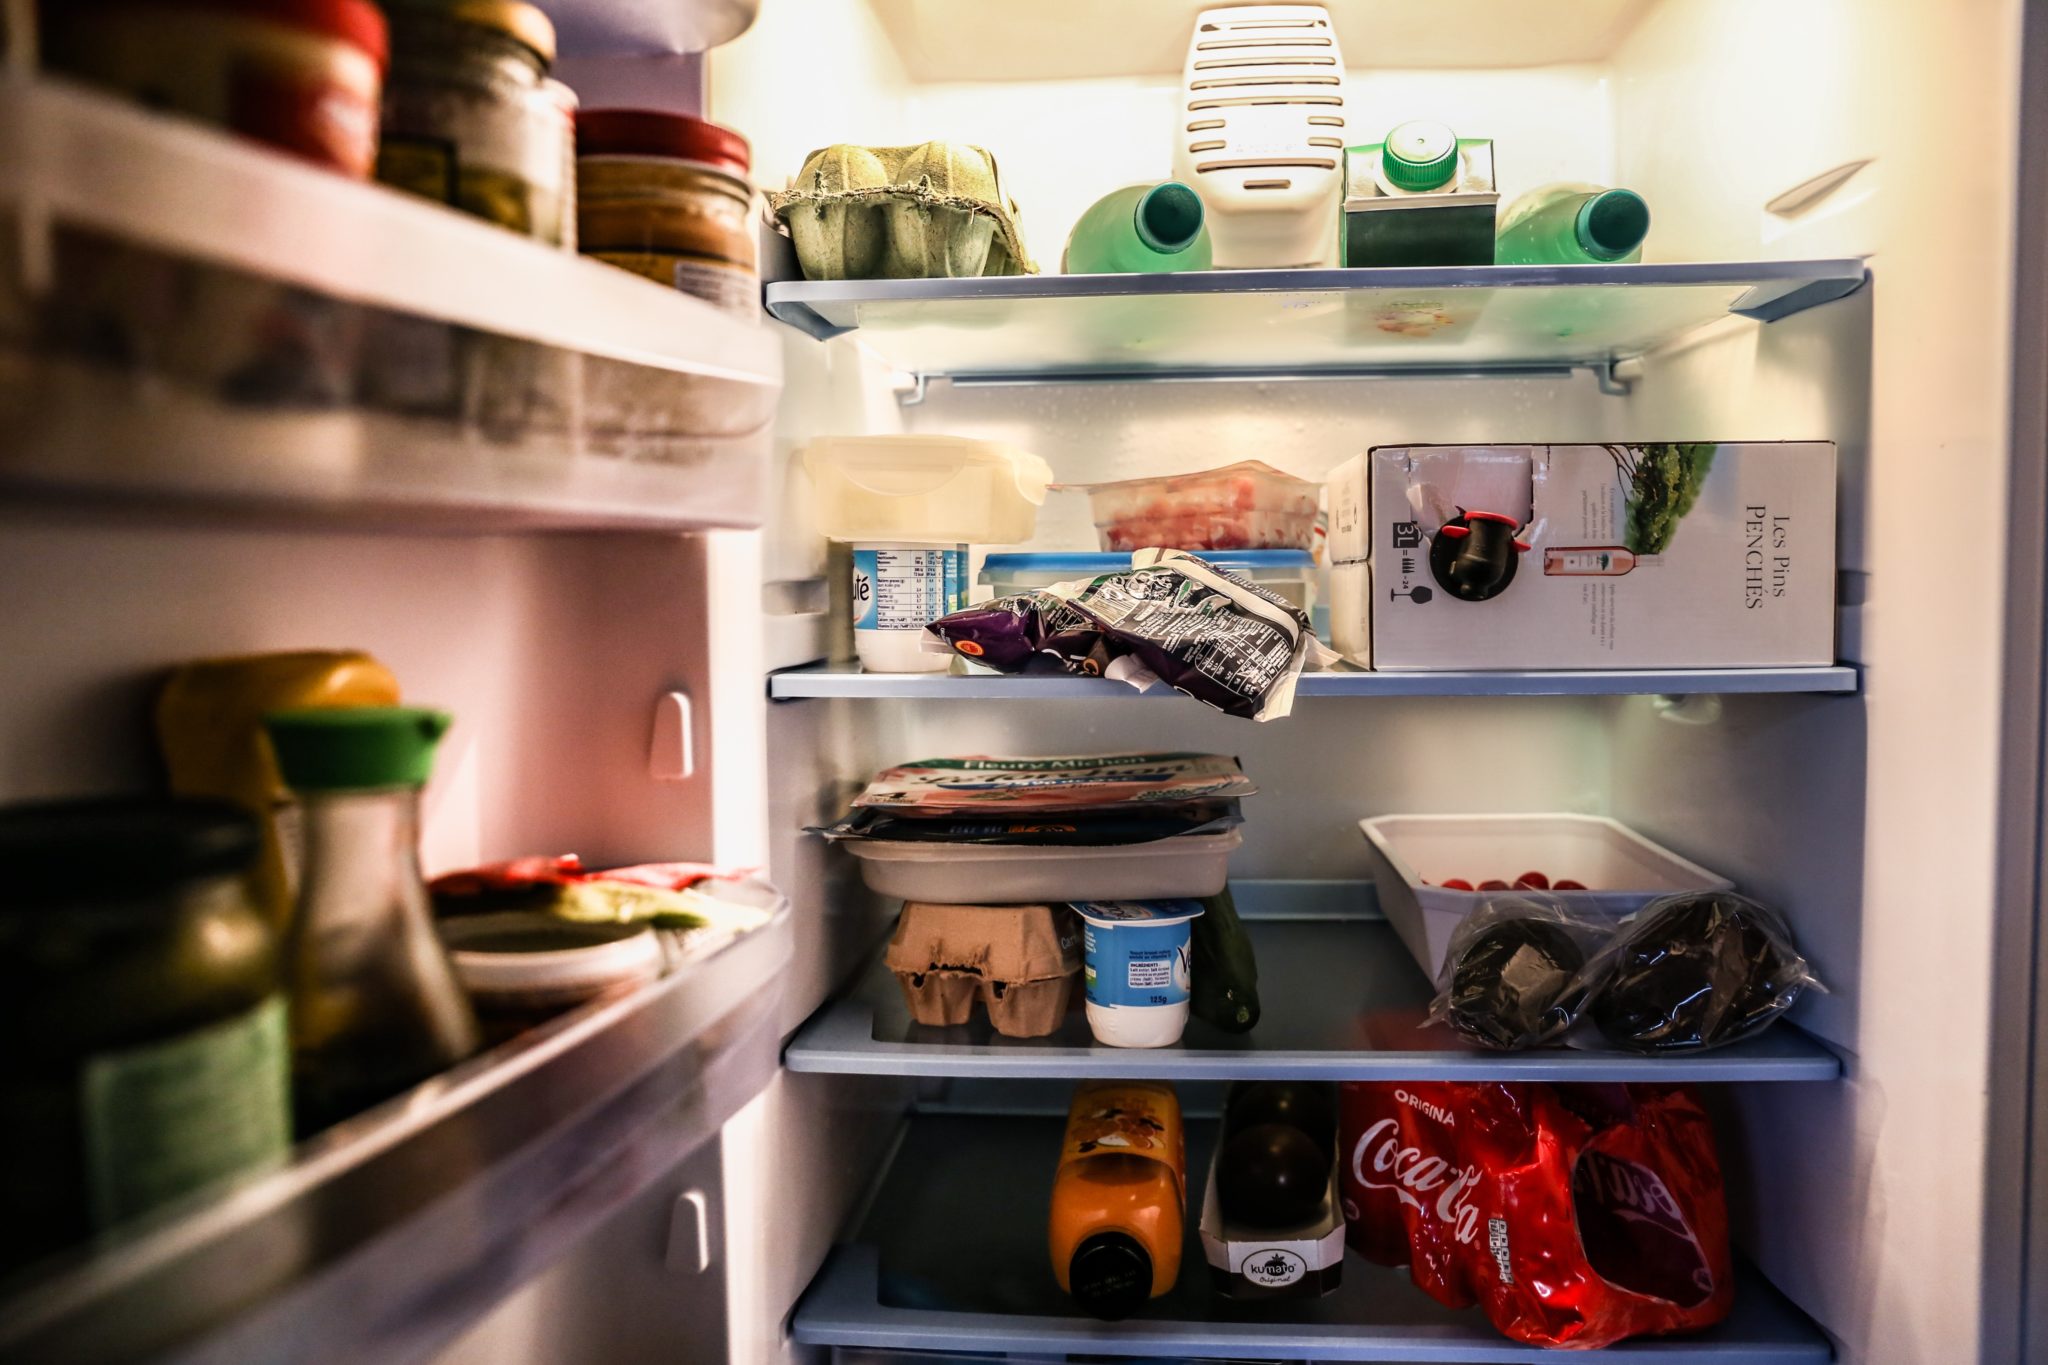 7 Foods To NEVER Put In Your Refrigerator